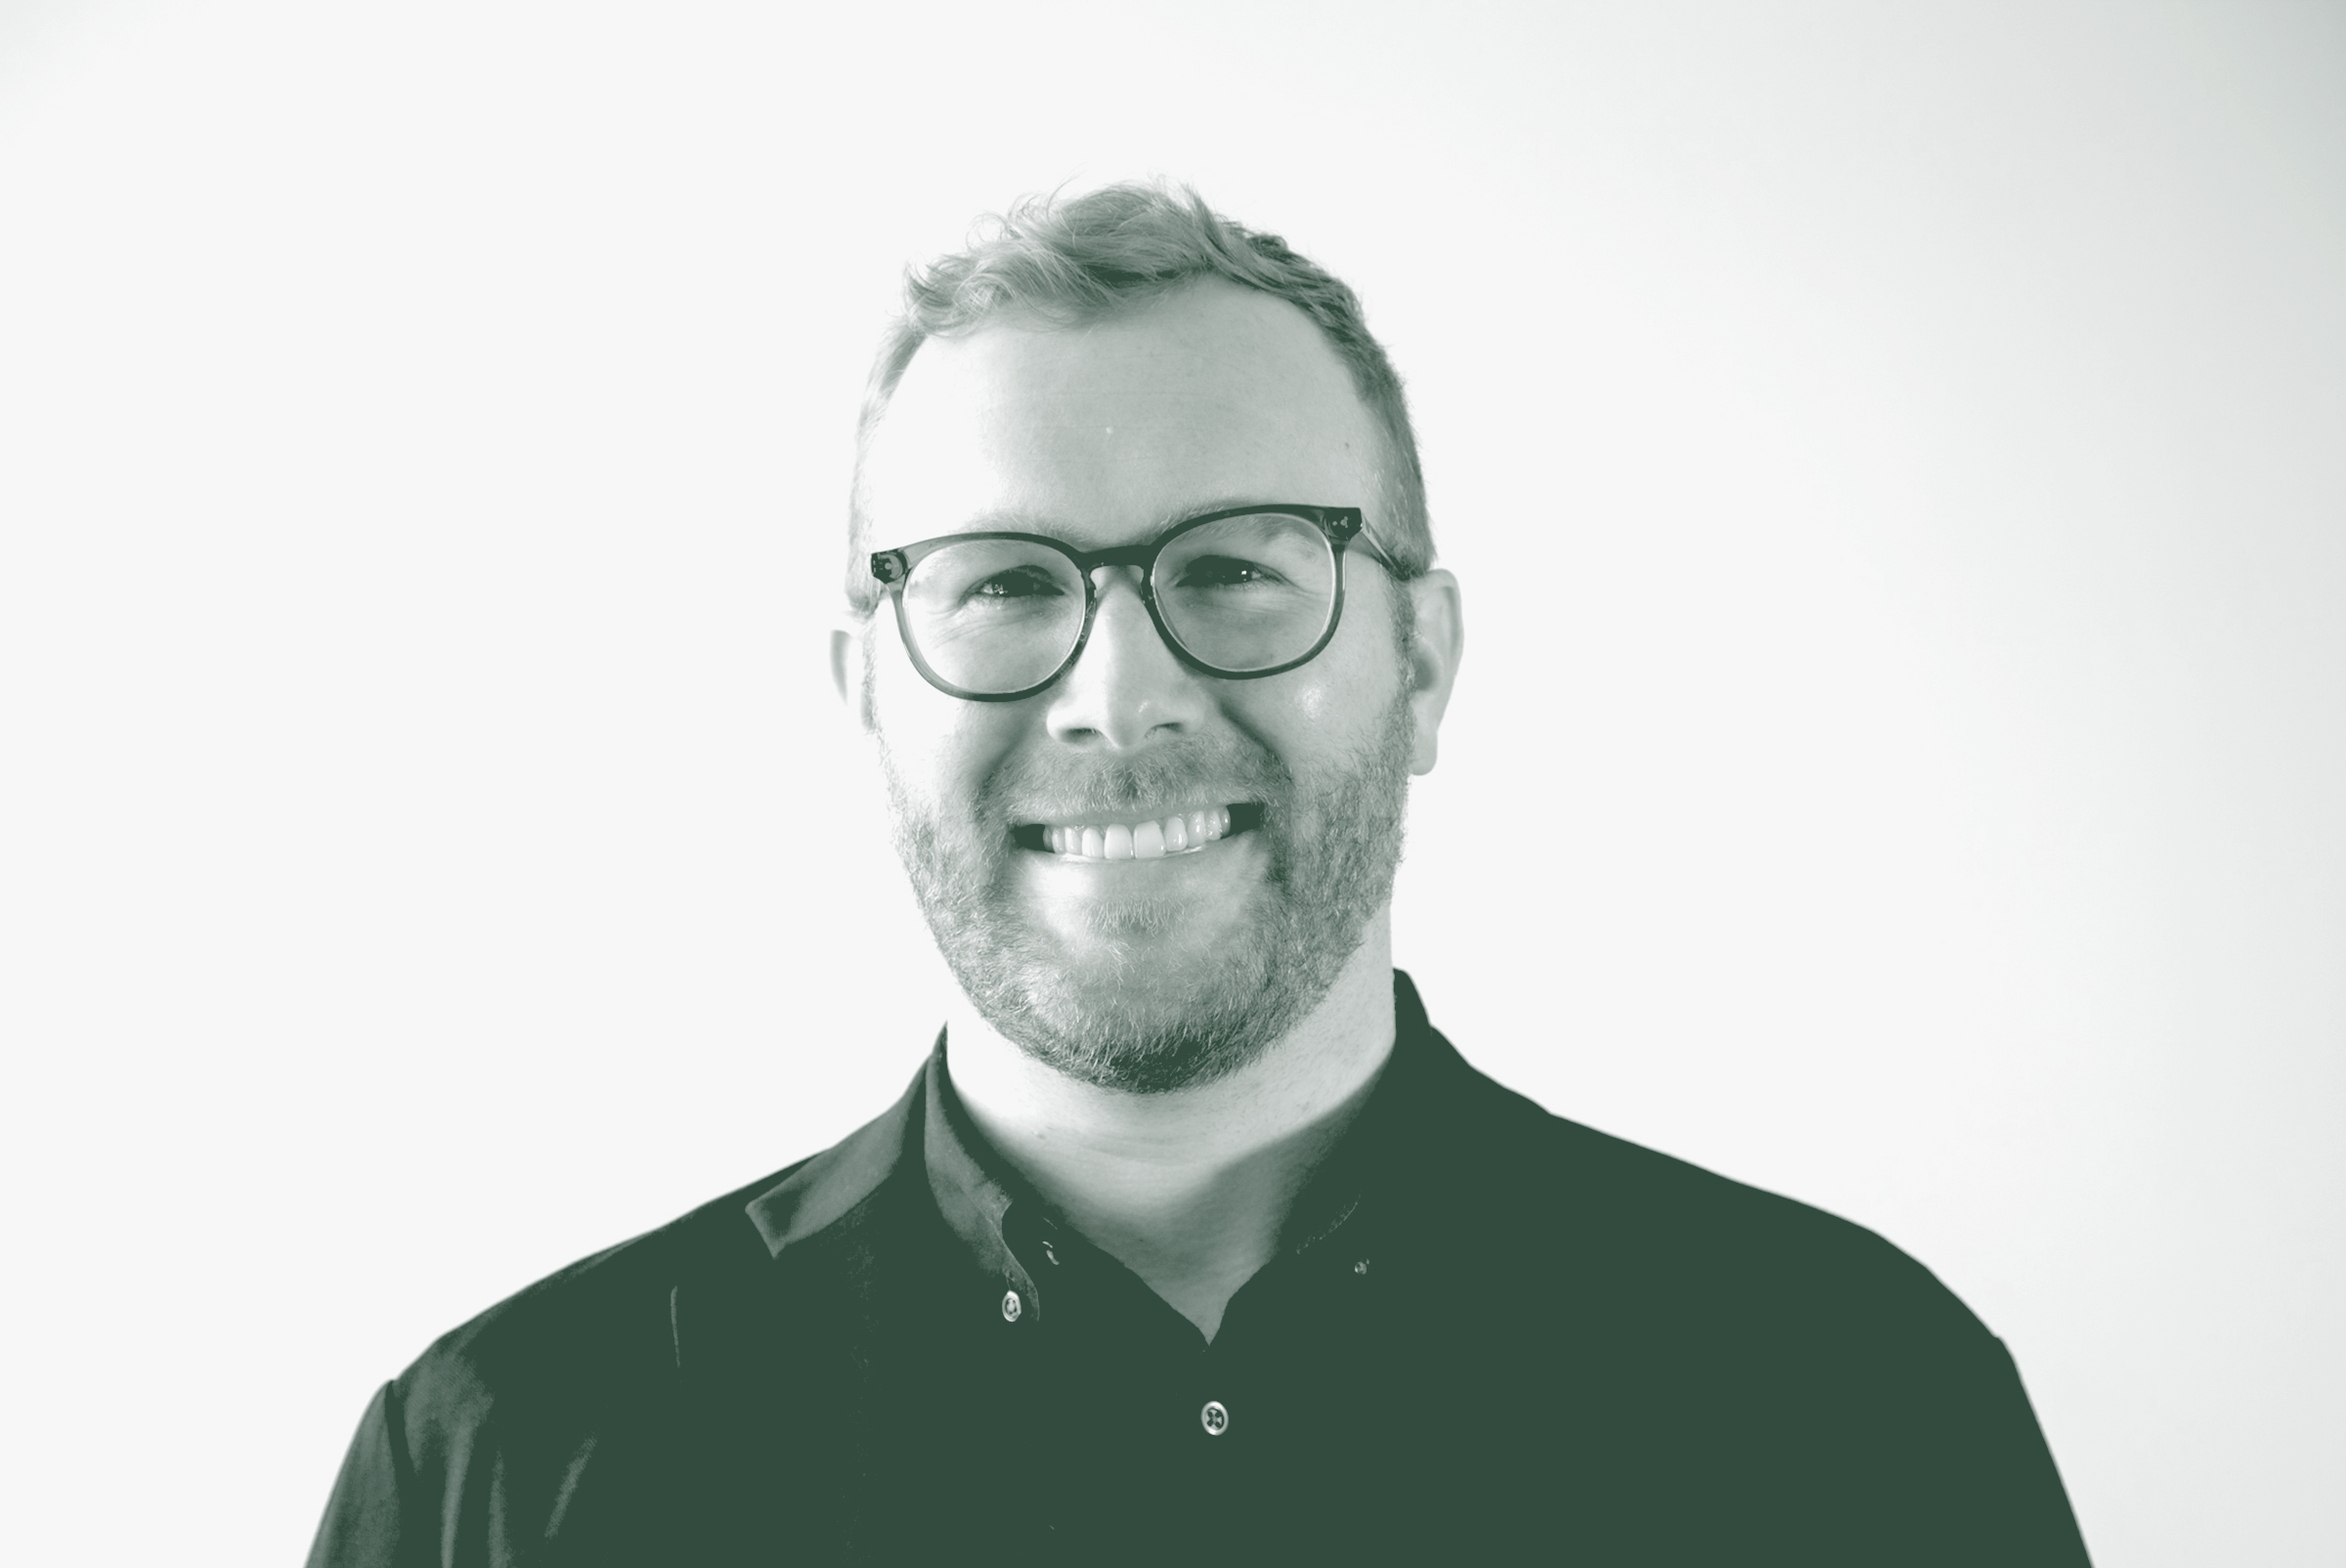 A black and white portrait of Blake Thames, an Associate and Design Leader with GFF, in front of a white background.